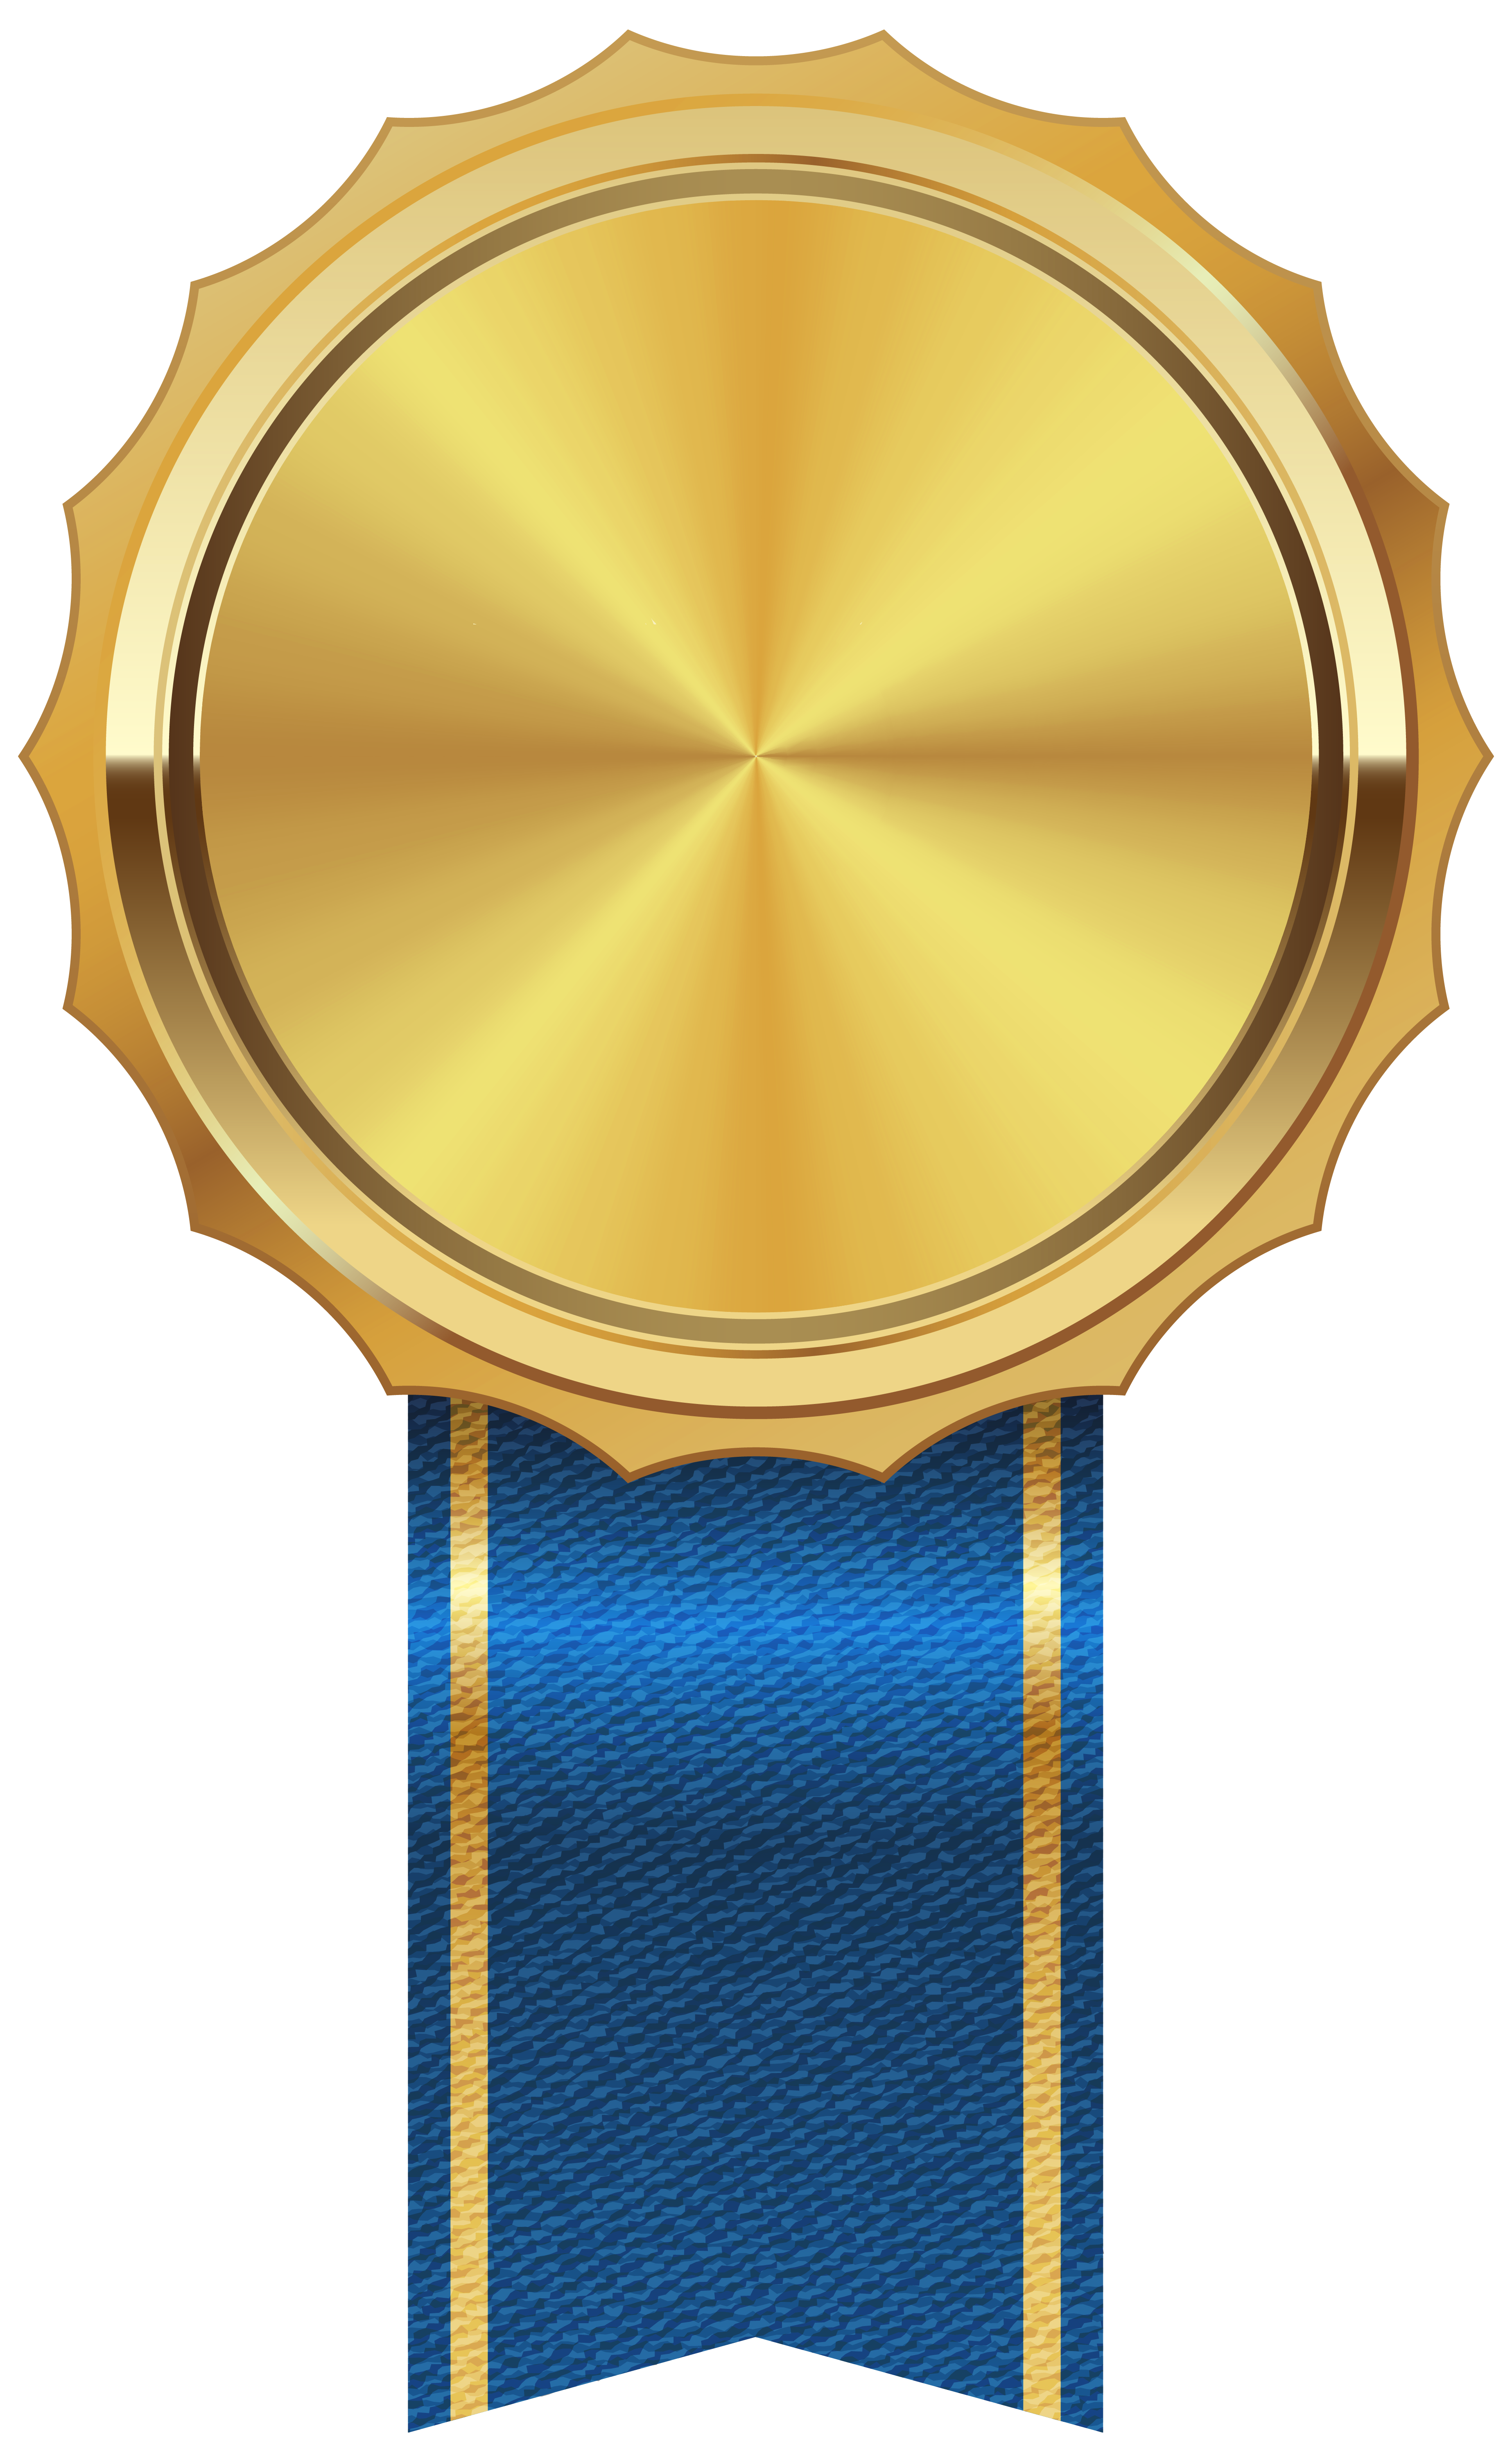 Gold Medal With Blue Ribbon PNG Clipart Image ​High Quality Image And Transparent PNG Free. Ribbon Png, Gold Medal Wallpaper, Gold Medal